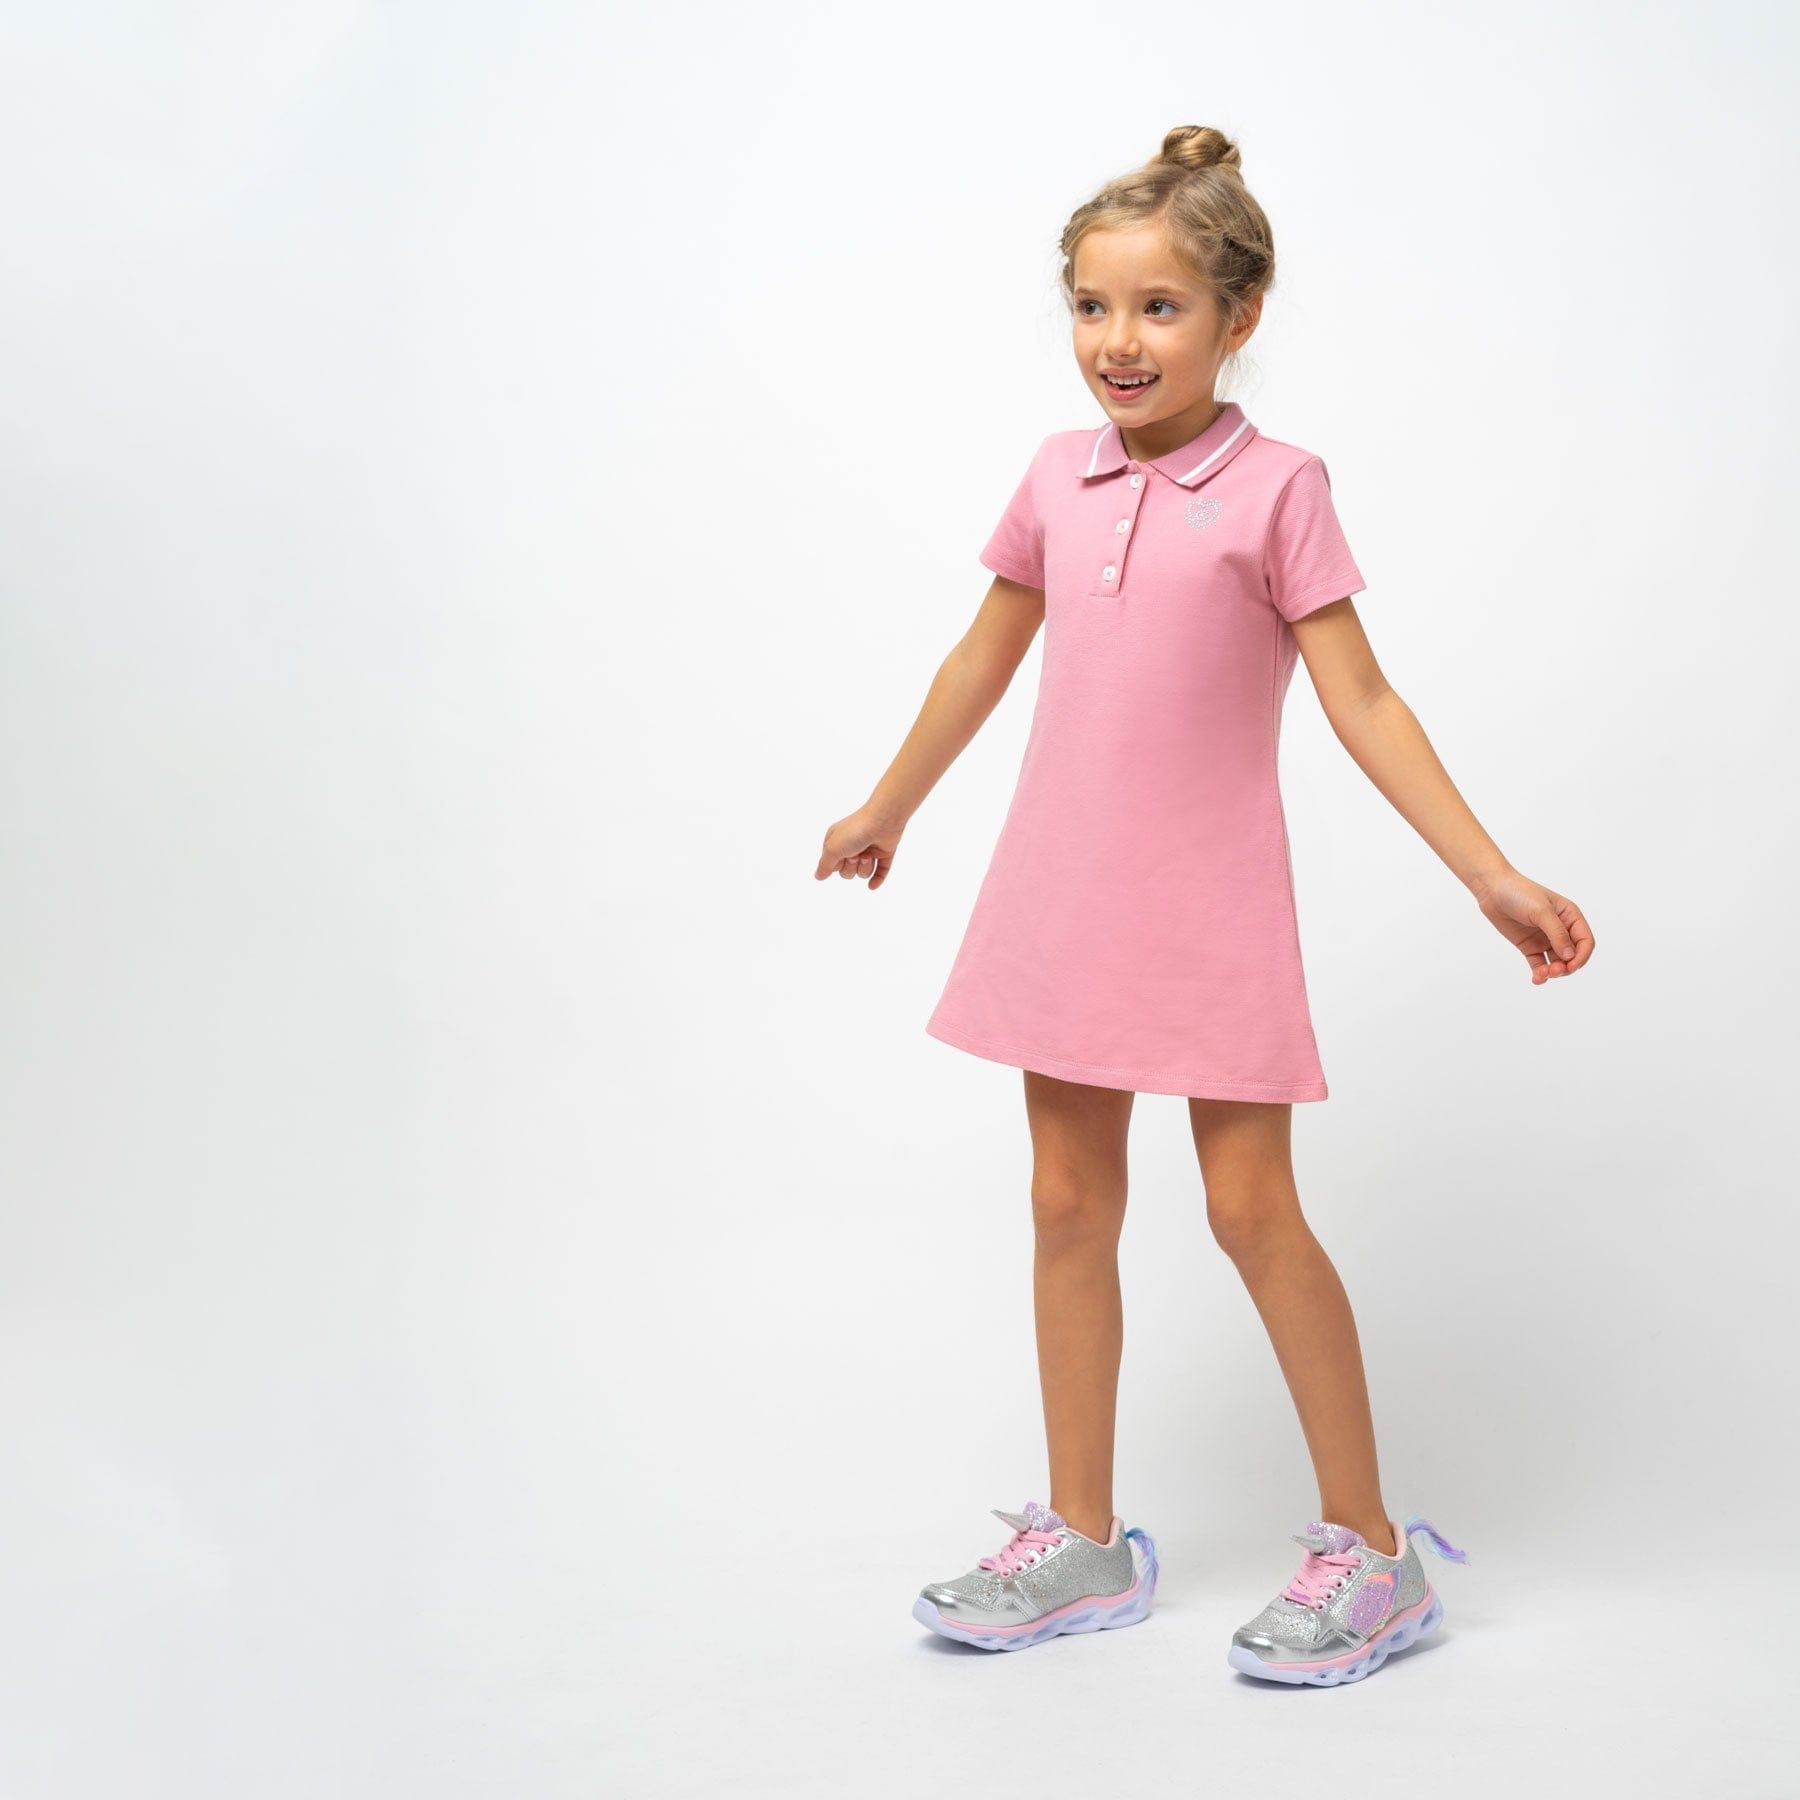 CONGUITOS TEXTIL Clothing Girl's Pink Polo Dress